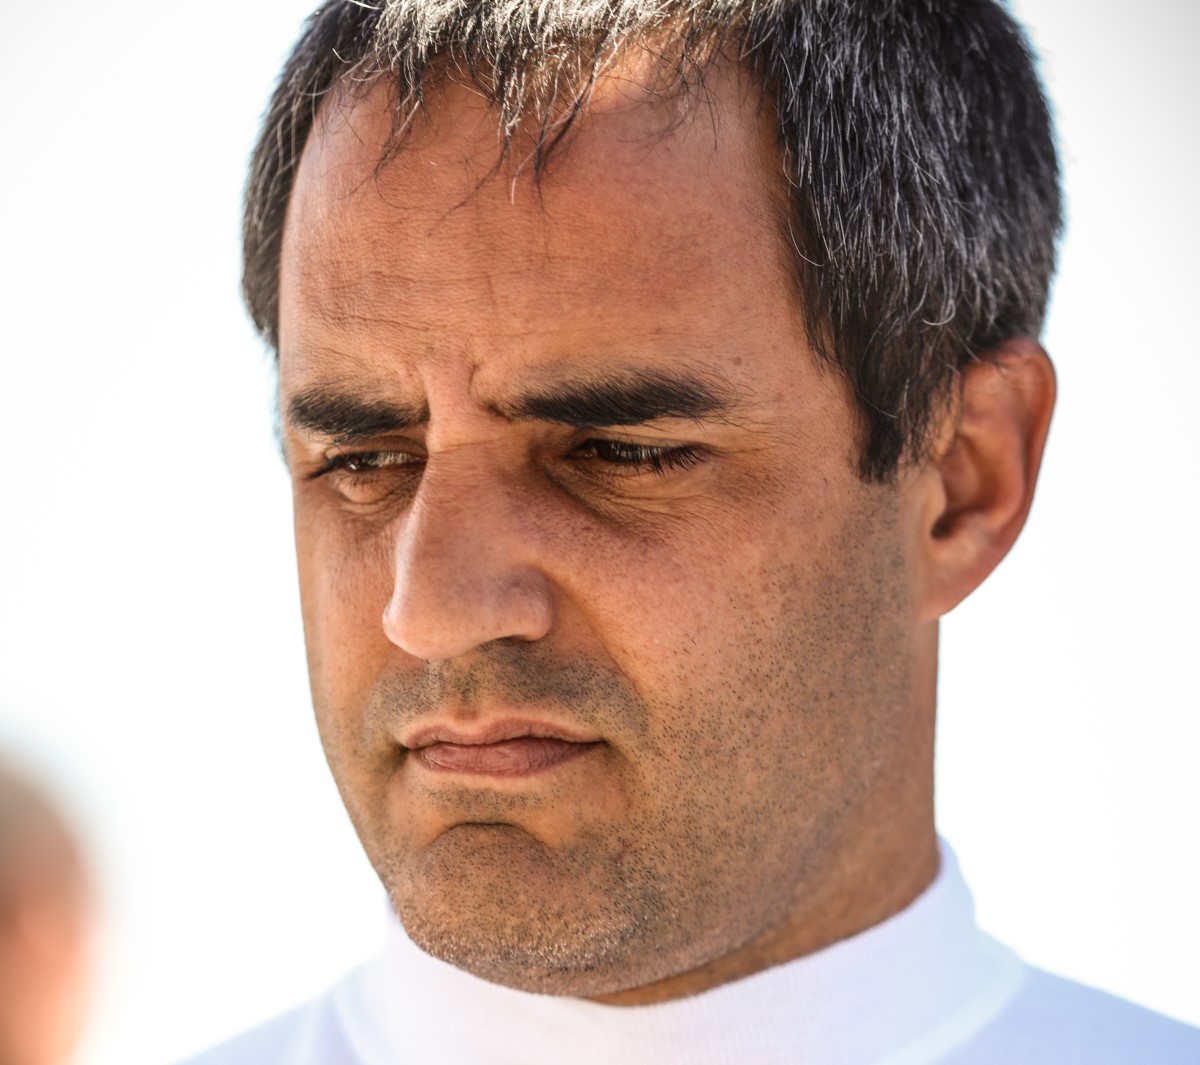 Juan Montoya says one car has always dominated in F1. Why? Because F1 is an engineering endeavor and the cars is 99.9% of the equation, the driver a mere 0.01%